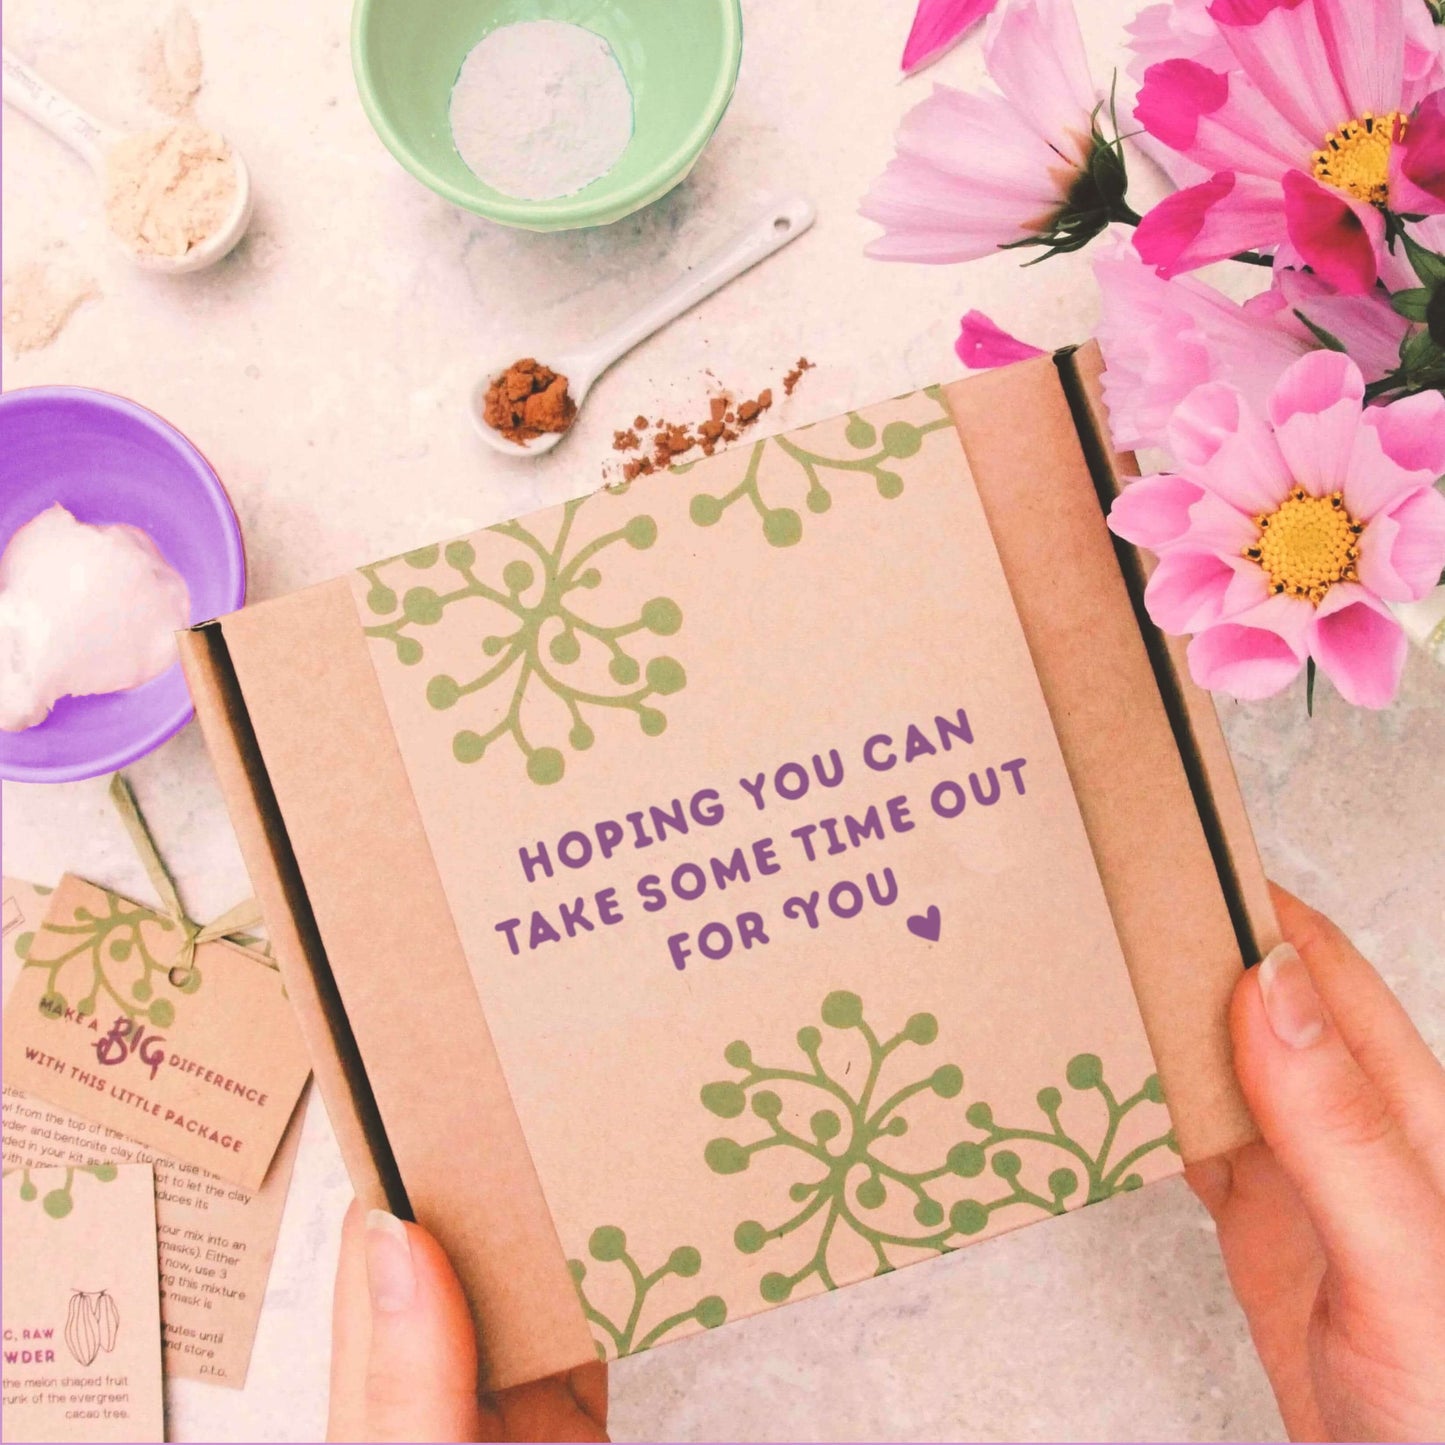 self care gift with gift message 'hoping you can take some time out for you'